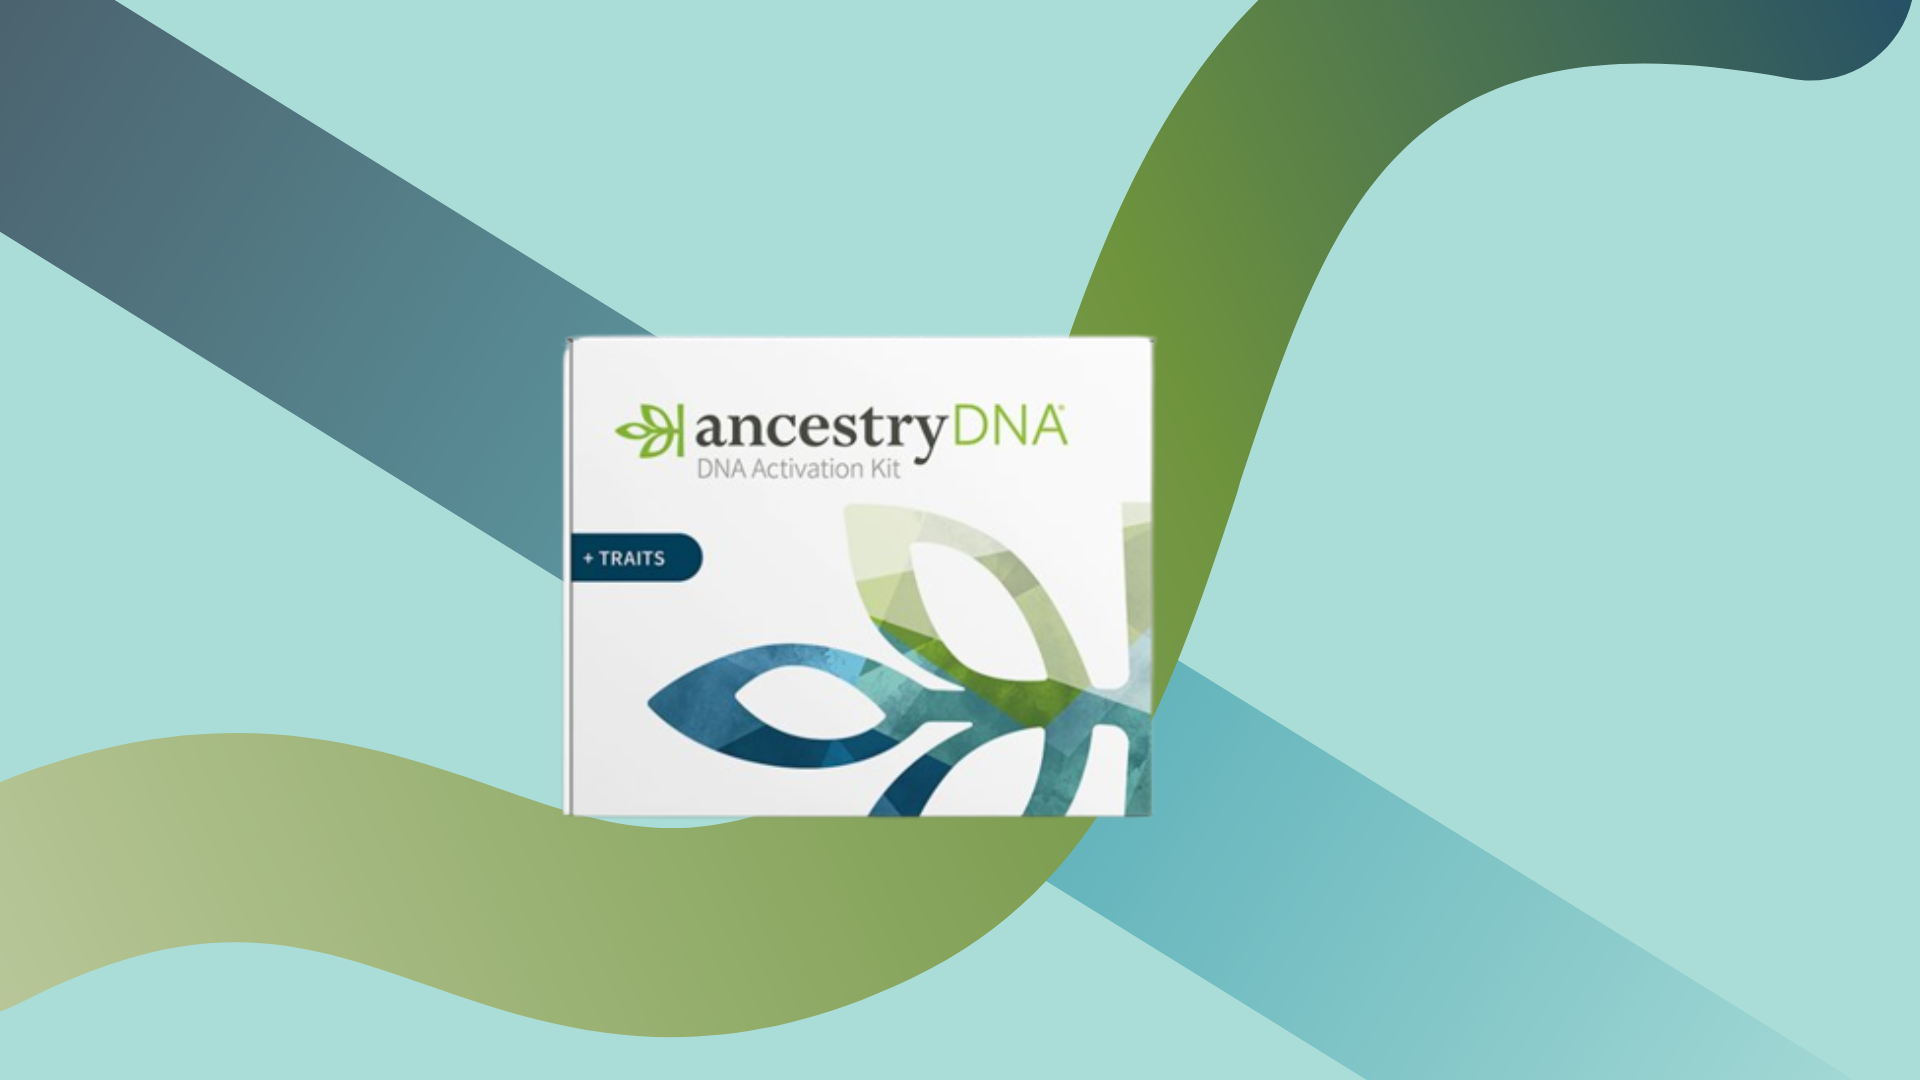 ancestrydna kit box on blue and green background